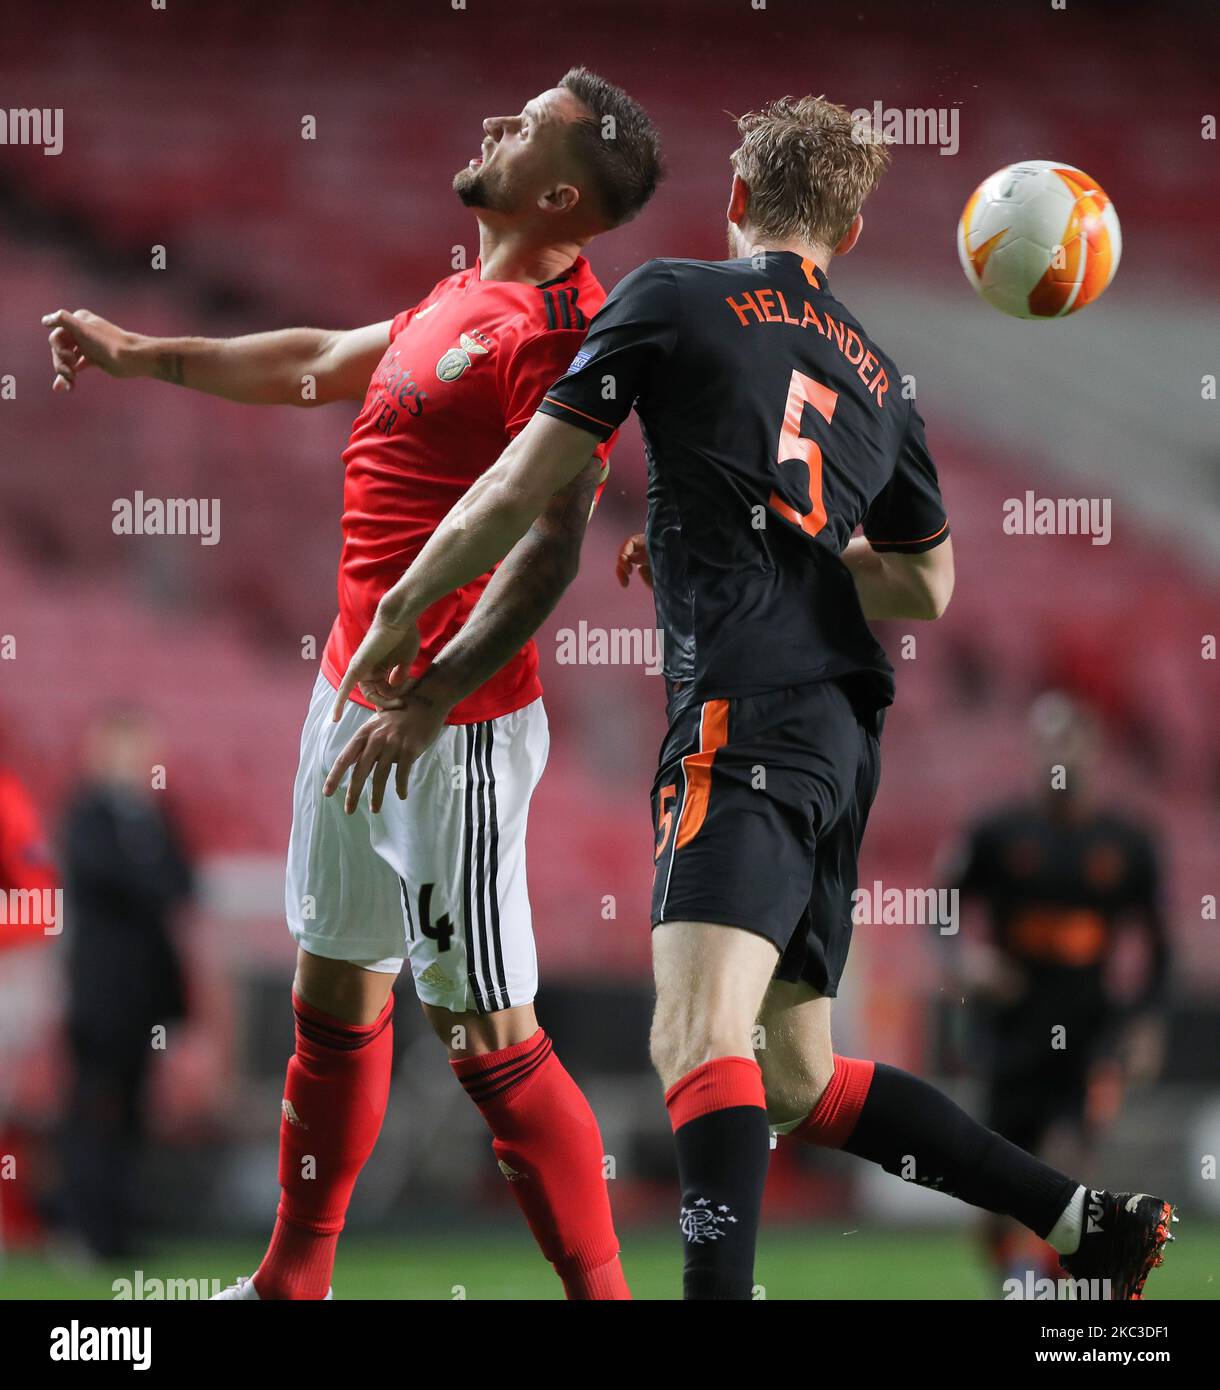 Haris Seferovic (L) of SL Benfica and Filip Helander (R) of Rangers FC during the UEFA Europa League Group D stage match between SL Benfica and Rangers FC at Estadio da Luz on November 5, 2020 in Lisbon, Portugal. (Photo by Paulo Nascimento/NurPhoto) Stock Photo